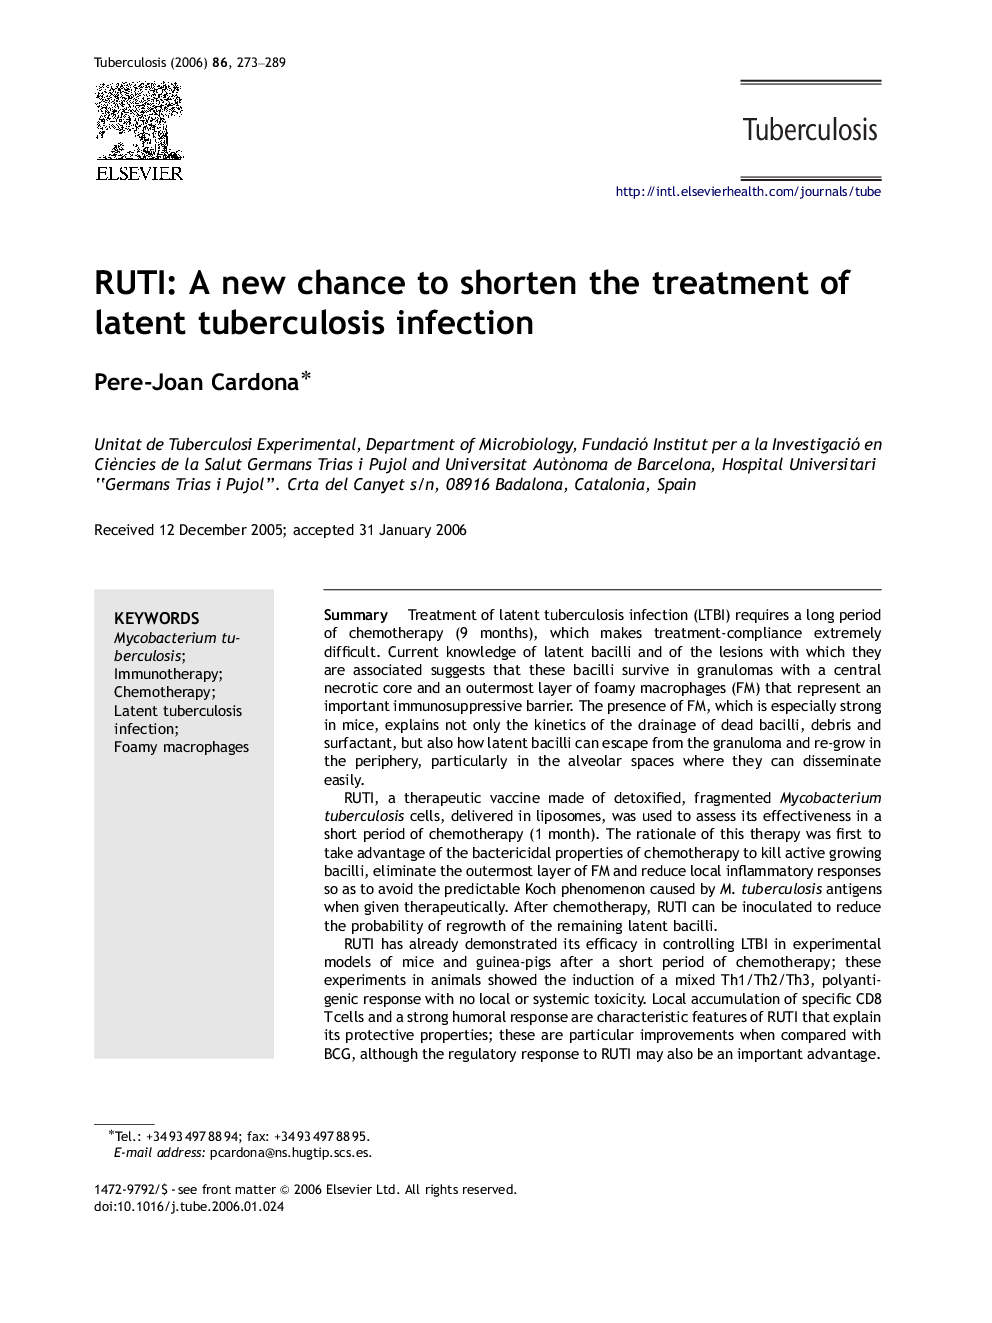 RUTI: A new chance to shorten the treatment of latent tuberculosis infection